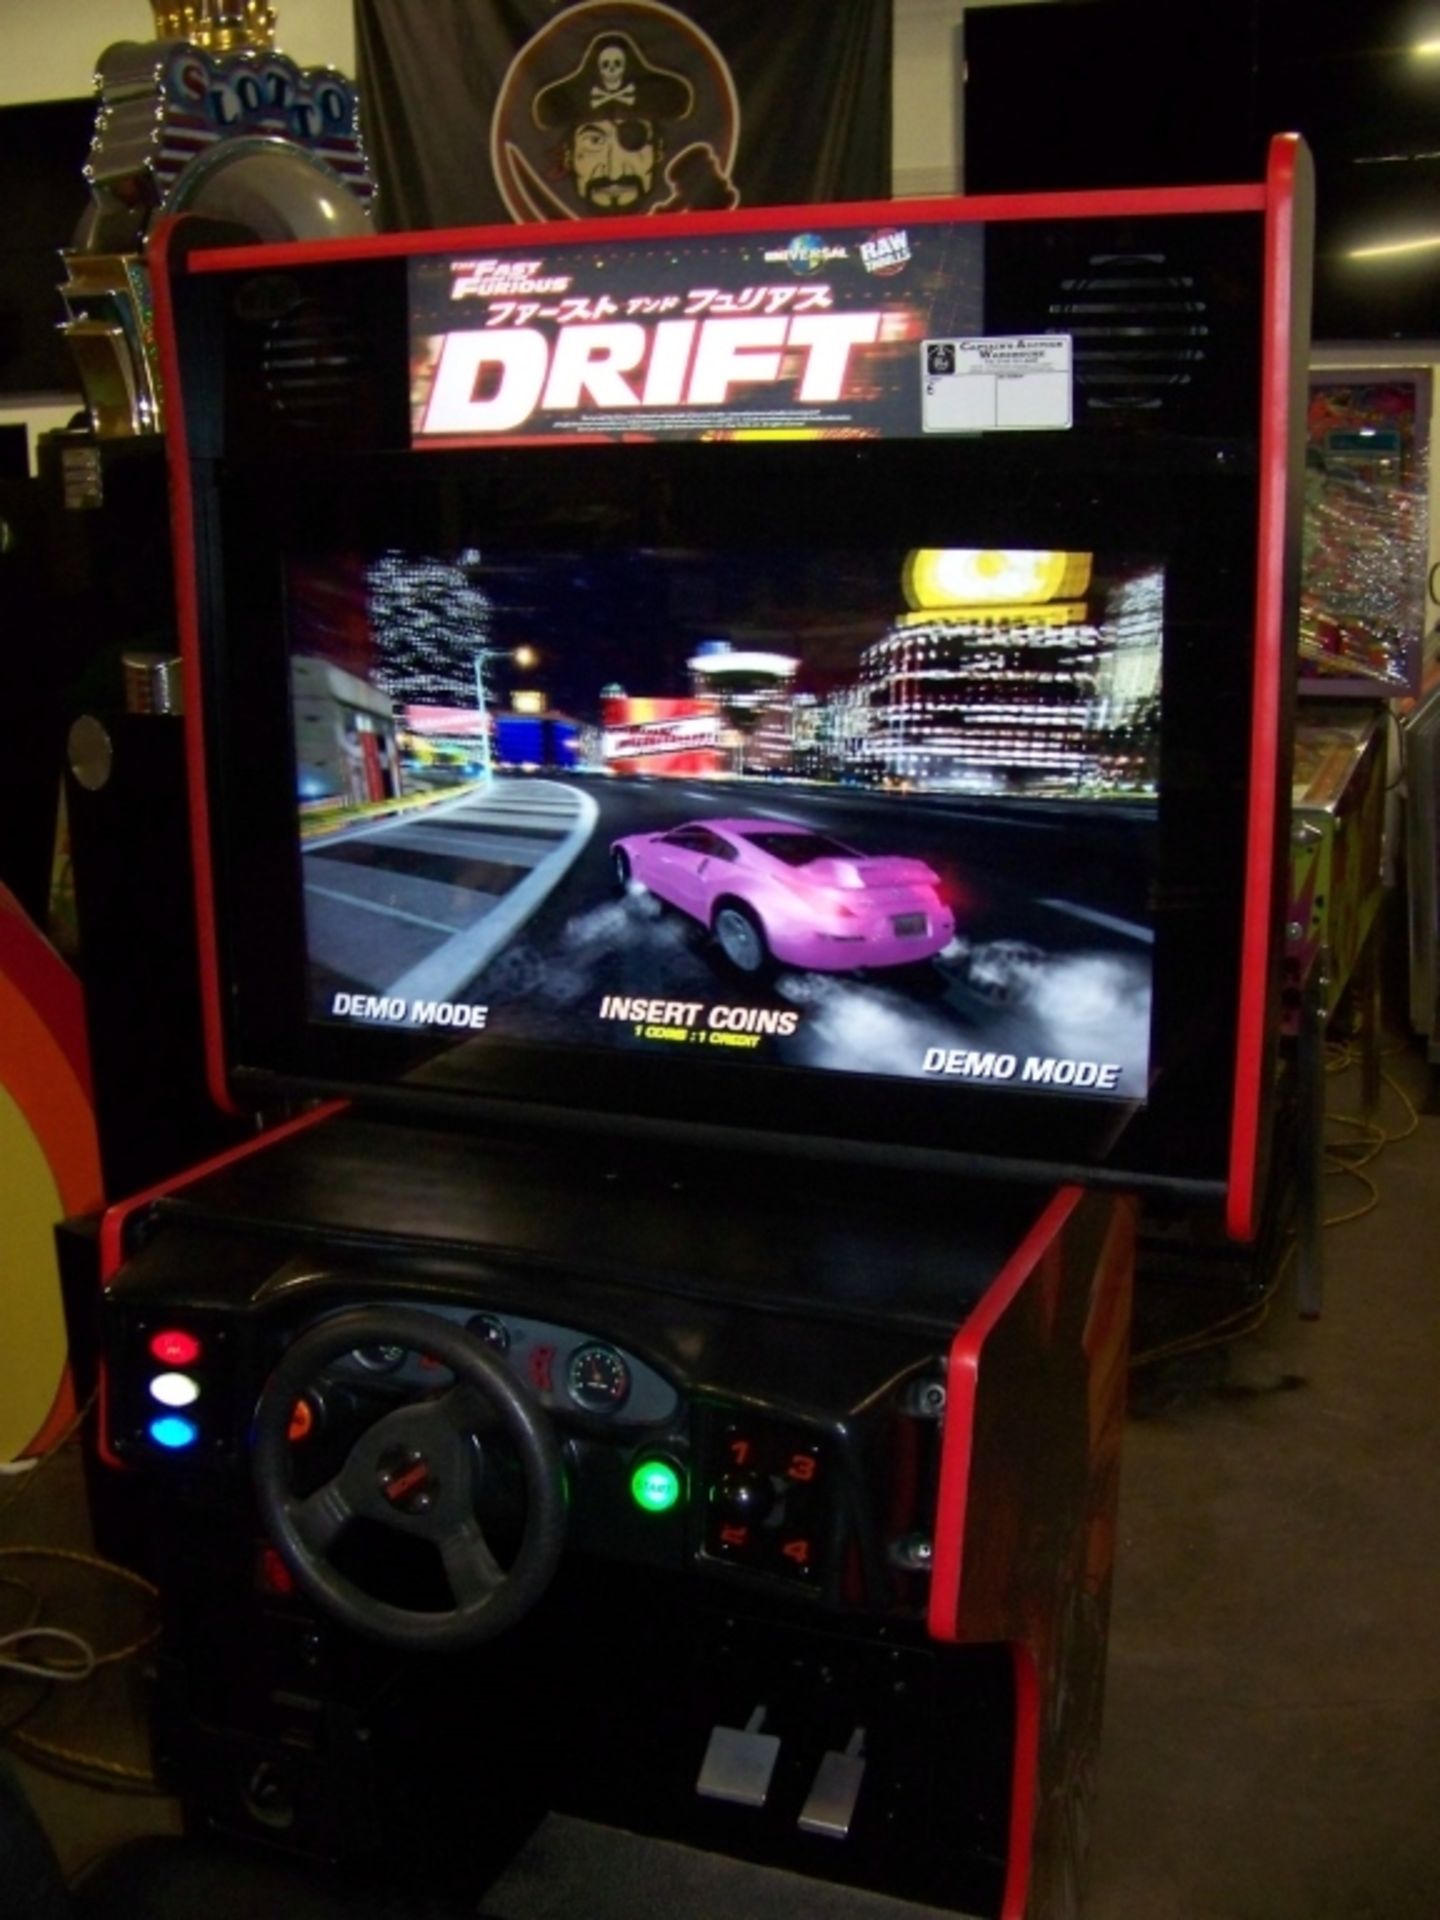 DRIFT FAST & FURIOUS DELUXE 36" LCD RACING ARCADE - Image 2 of 4